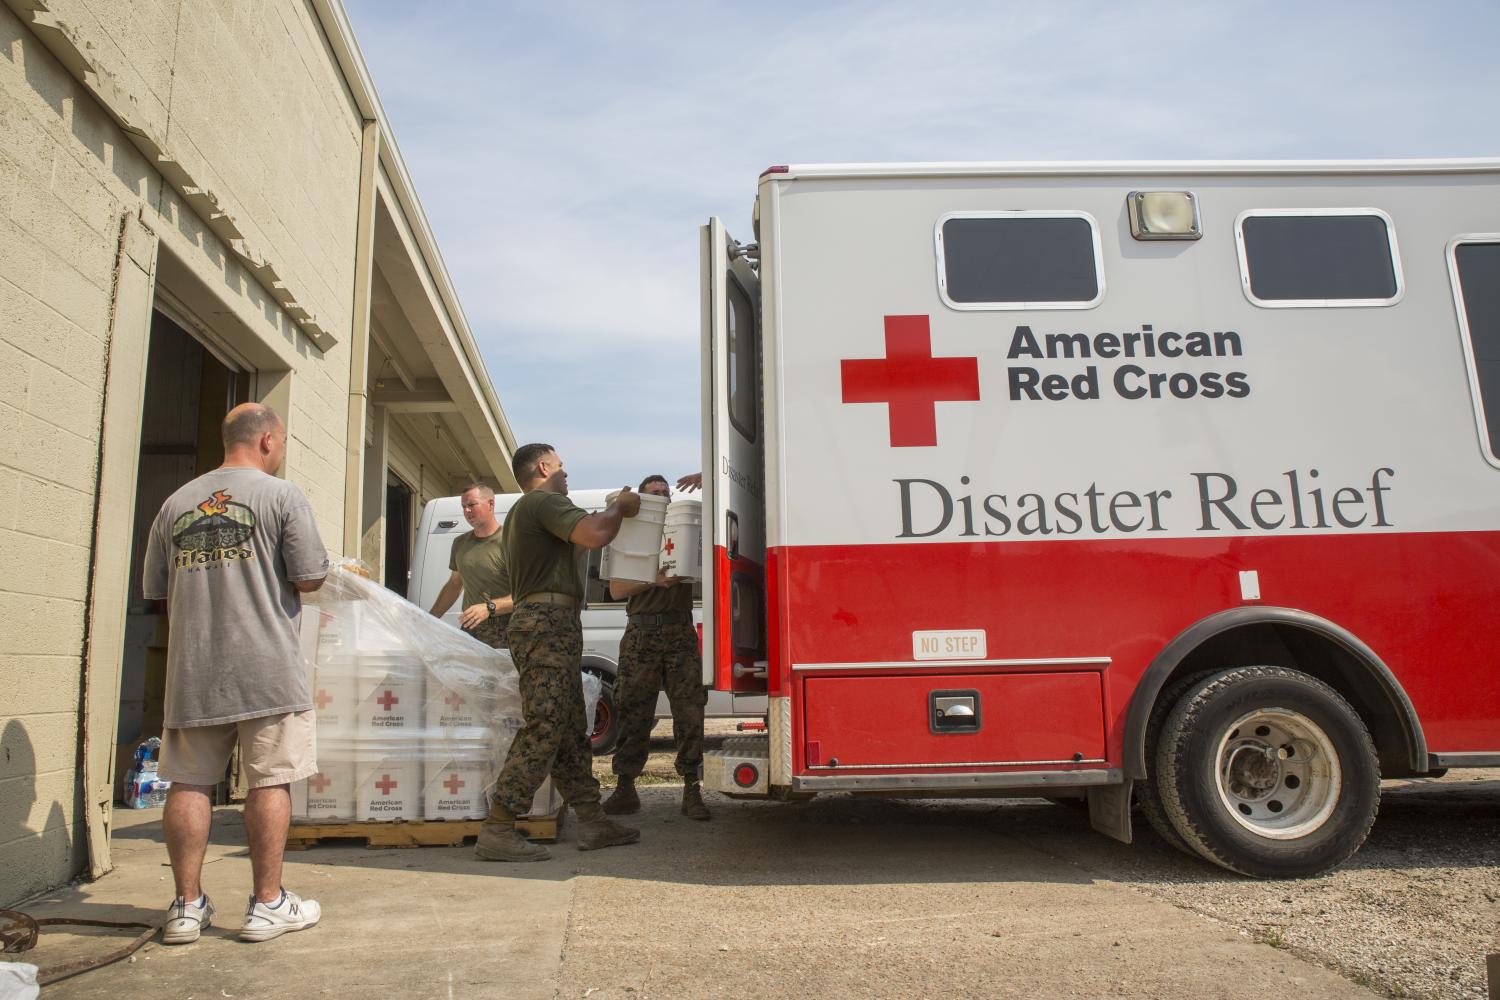 Marines from 14th Marine Regiment, 4th Marine Division, Marine Forces Reserve, load buckets of Red Cross cleaning supplies onto an American Red Cross Disaster Relief Van at Red Cross warehouse in Beaumont, Texas, Sept. 3, 2017.